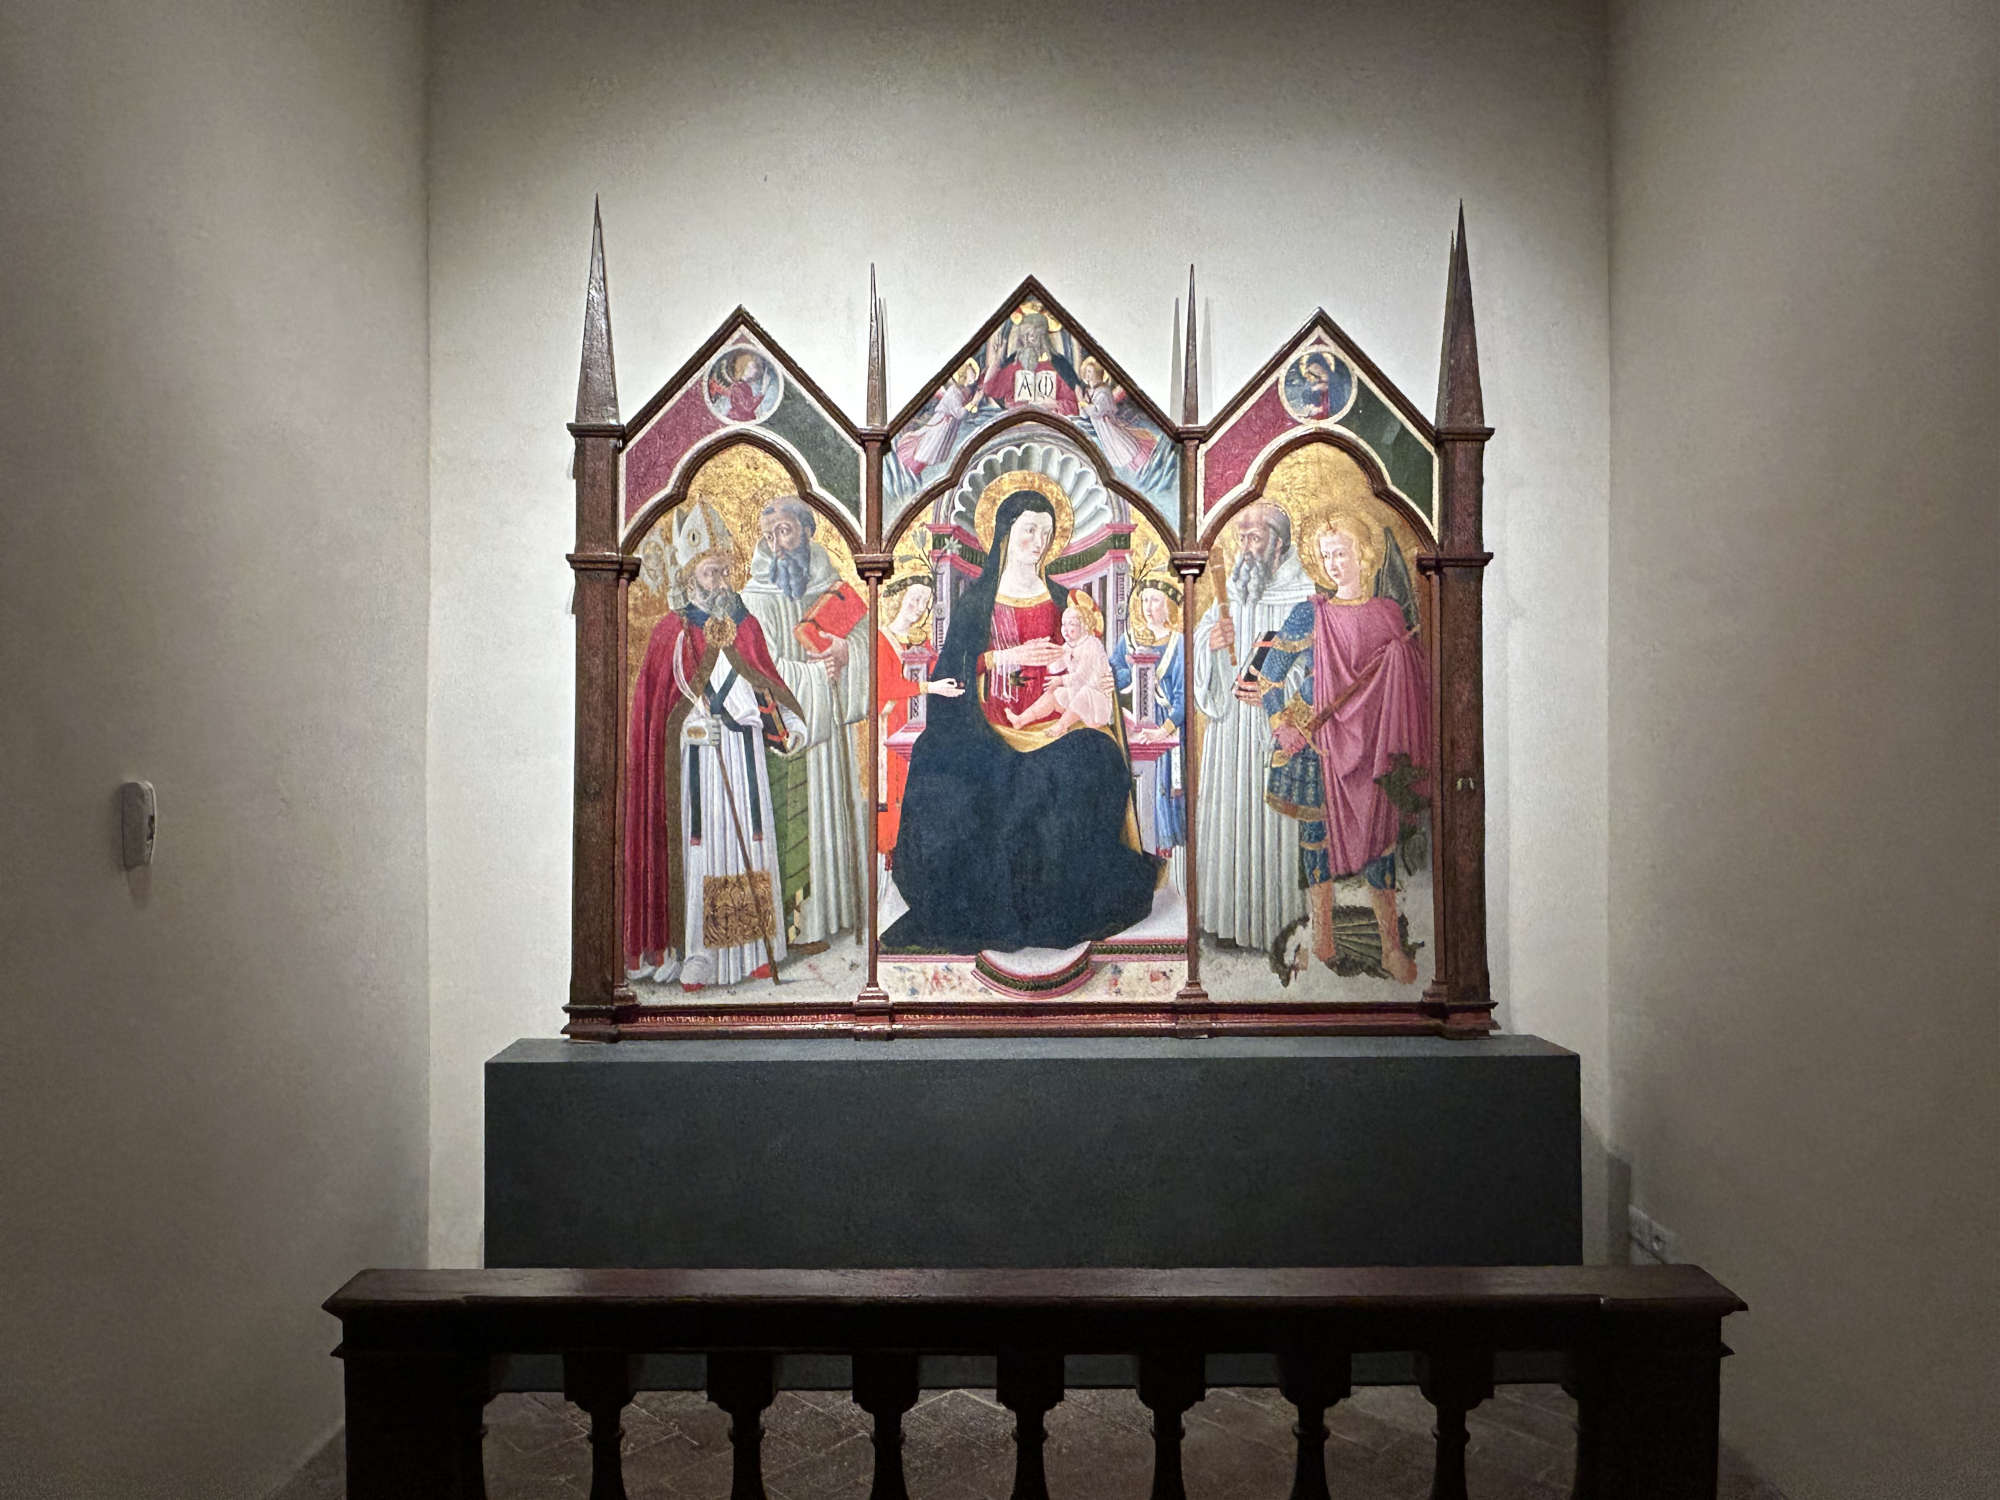 The polyptych with the Madonna and Child and Saints attributed to Giuliano Amidei and displayed in the room where Michelangelo was born